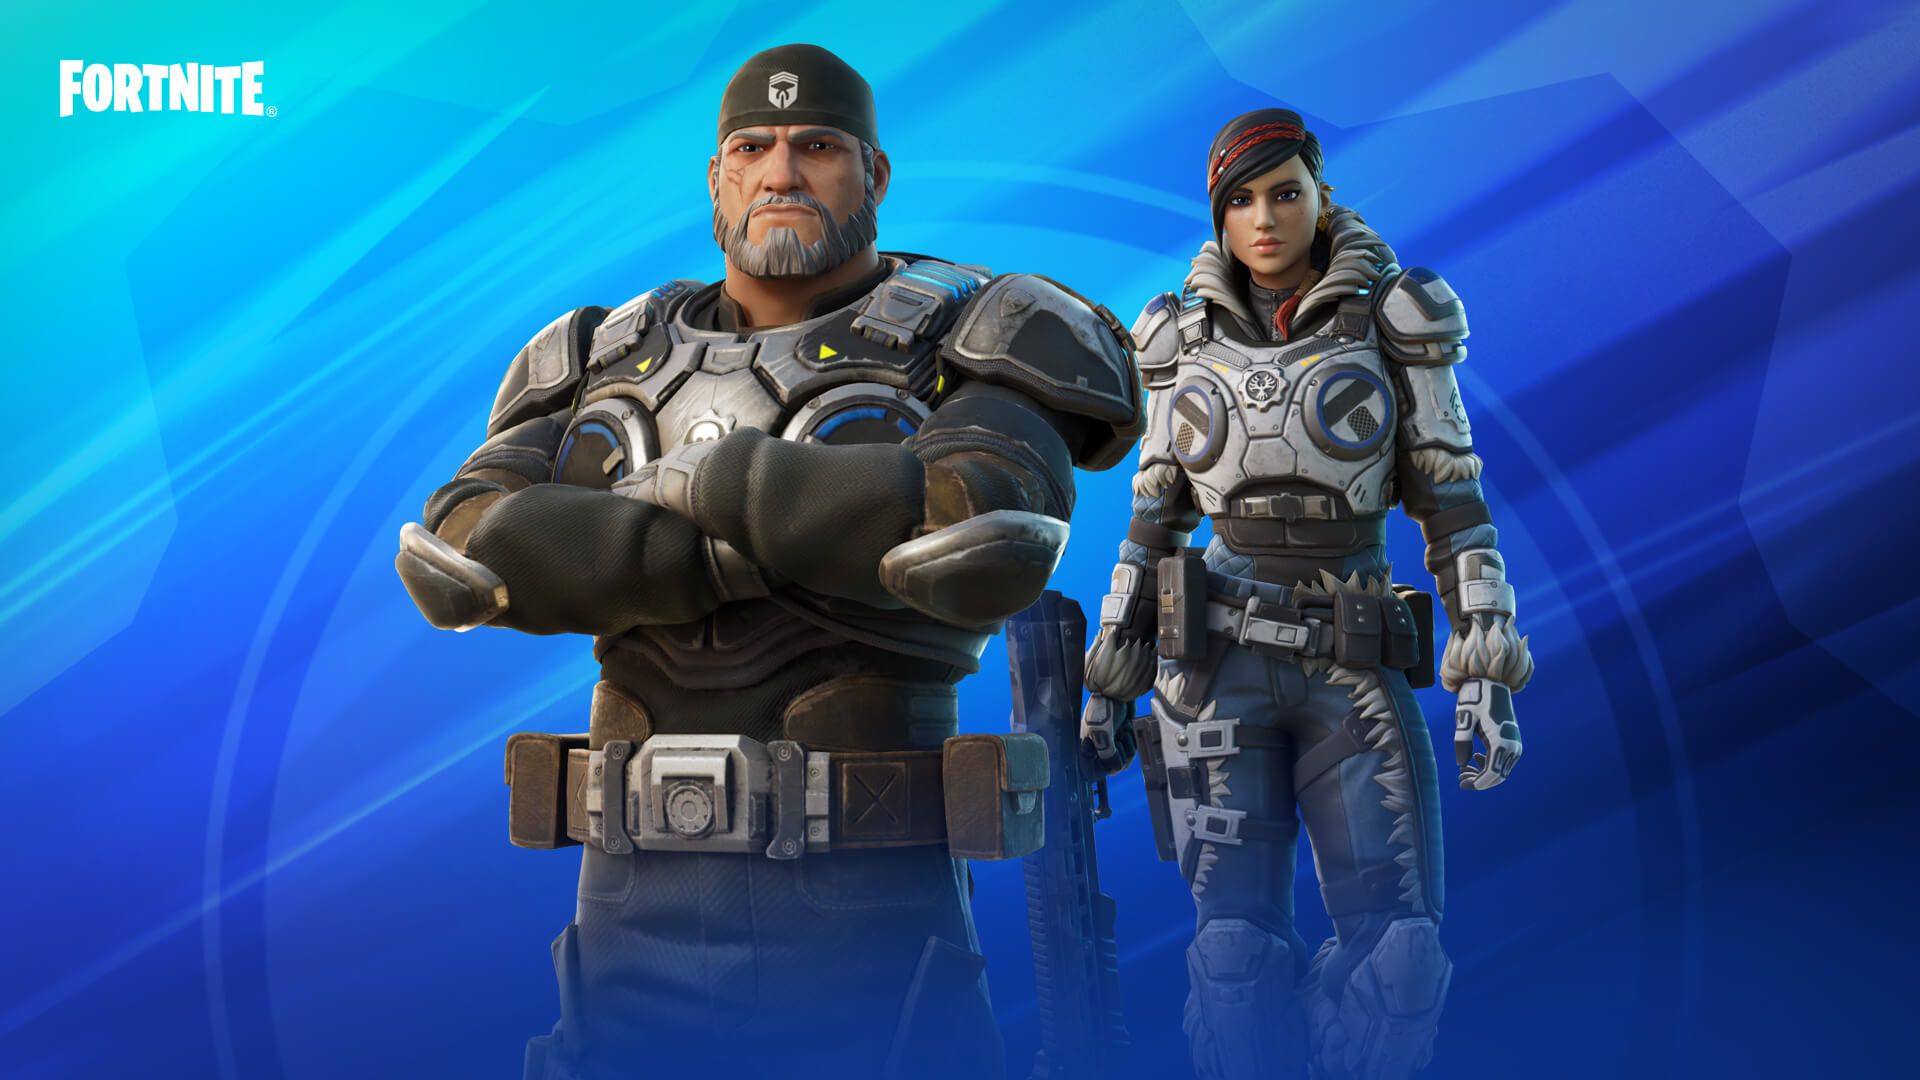 Fortnite From Gears Of War With Love Marcus Fenix And Kait